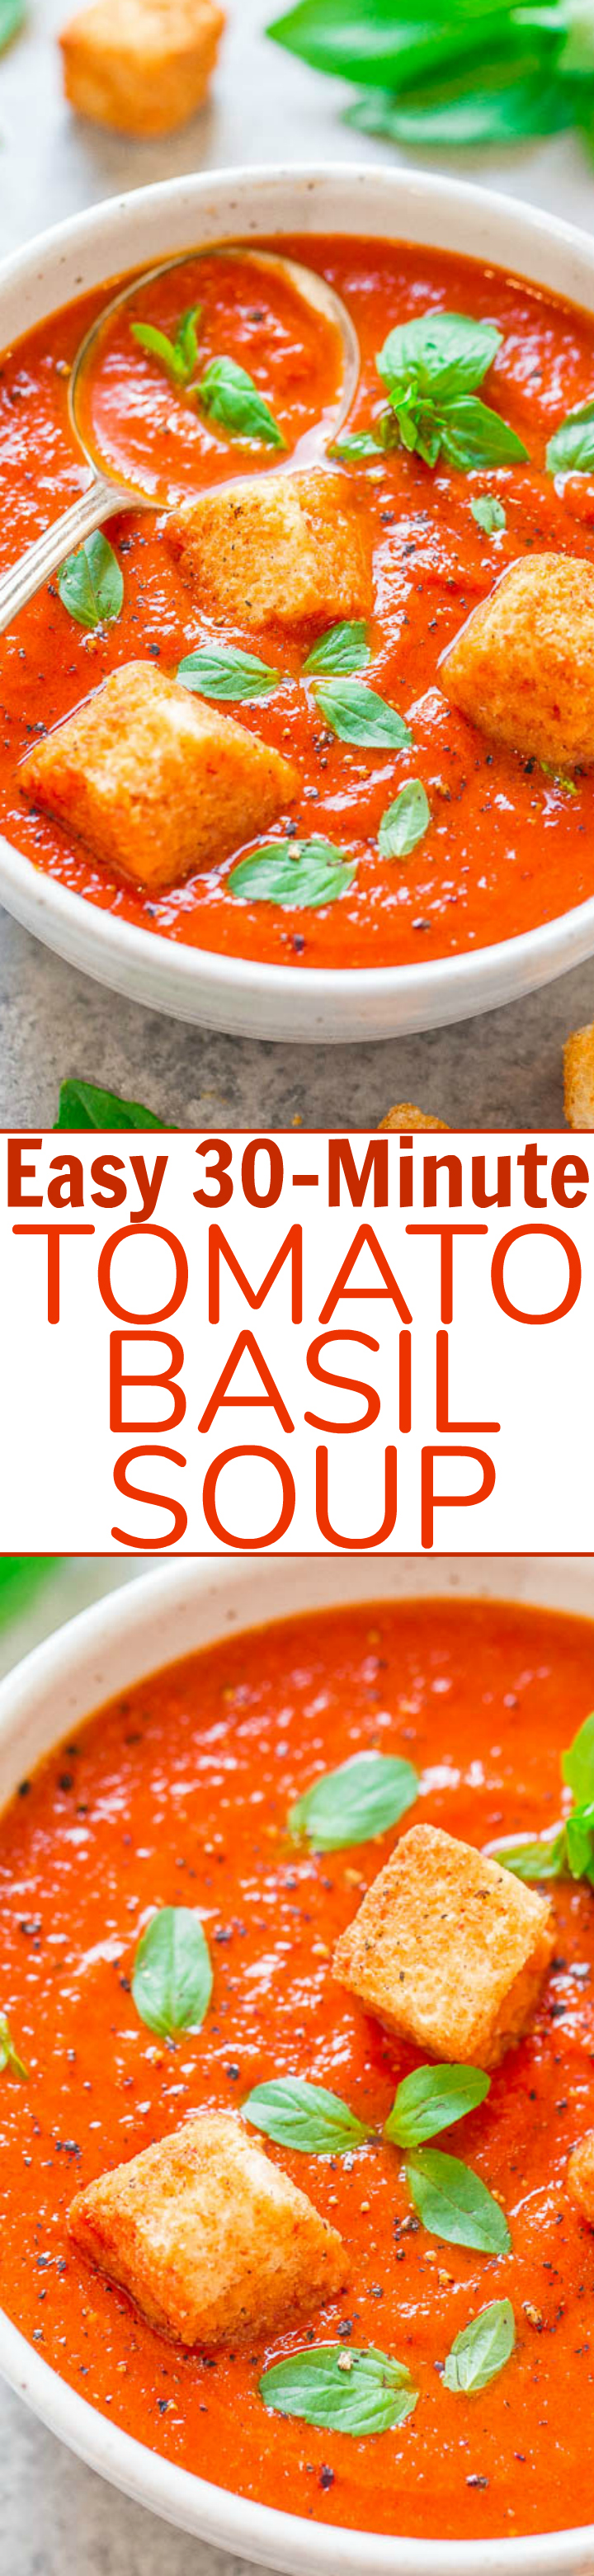 Easy 30-Minute Tomato Basil Soup - Hearty yet HEALTHY, fast, easy, and loaded with great tomato-basil flavor!! The perfect soup to warm you up and keep you satisfied! Great for easy lunches and busy weeknights!!